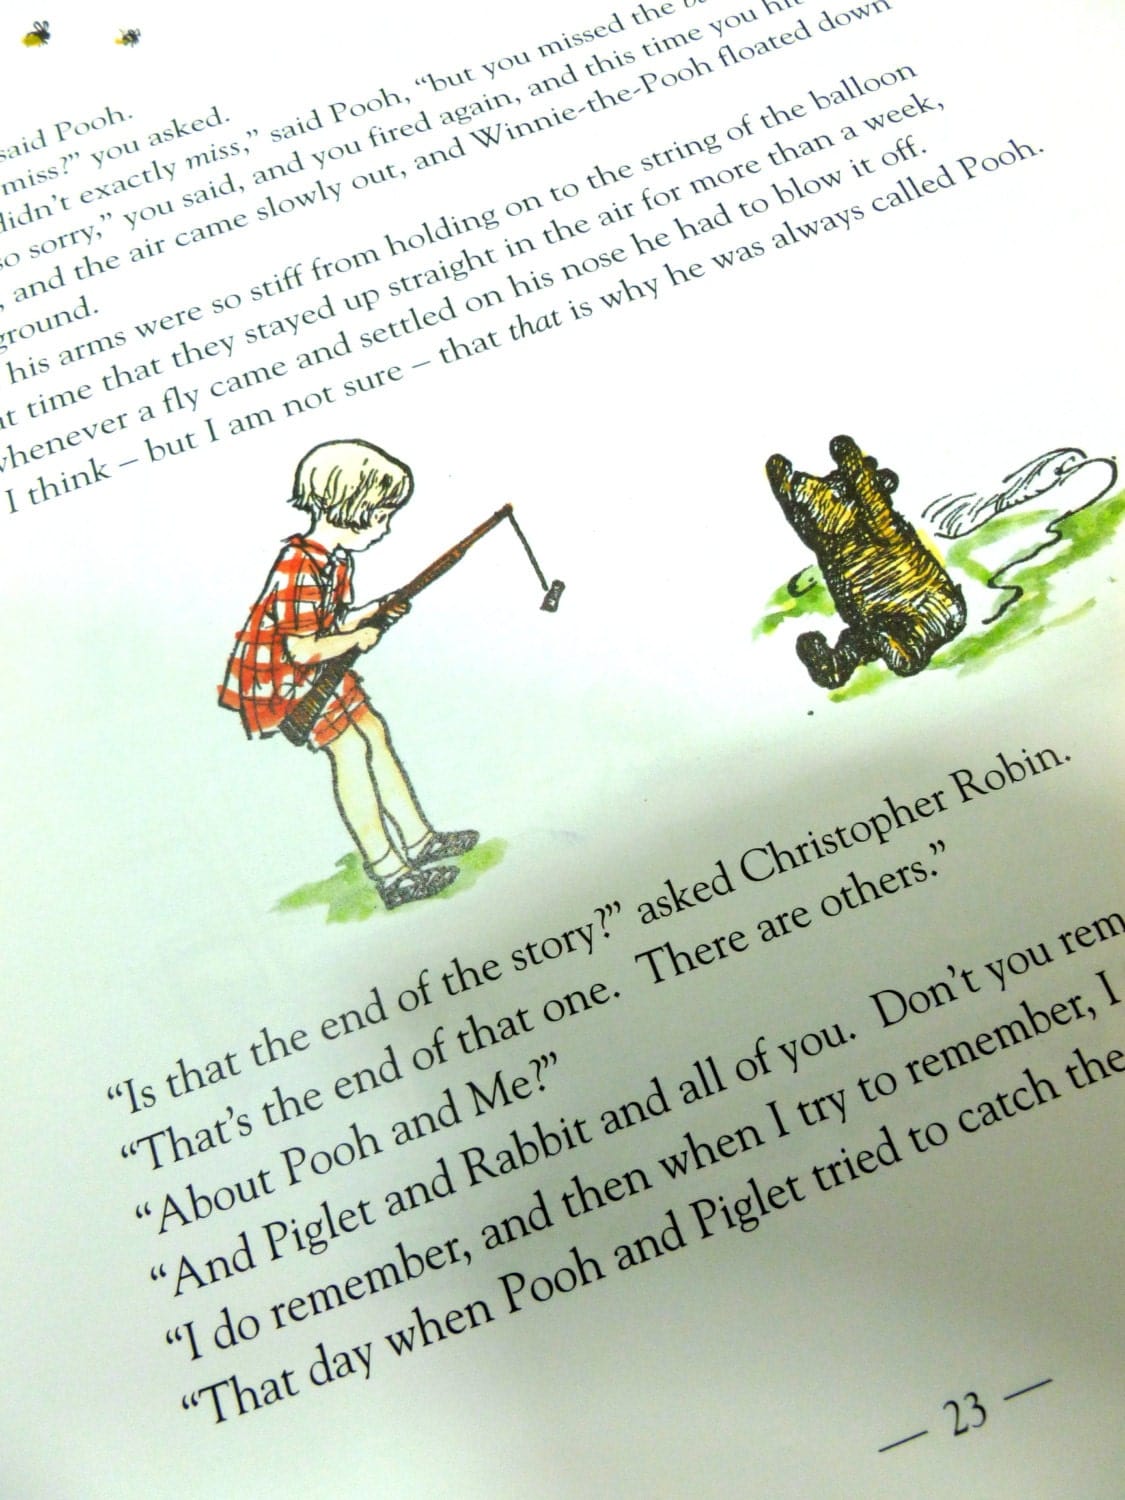 Christopher Robin holding a fishing rod with Pooh bear with his arms up in the air colour illustration. 